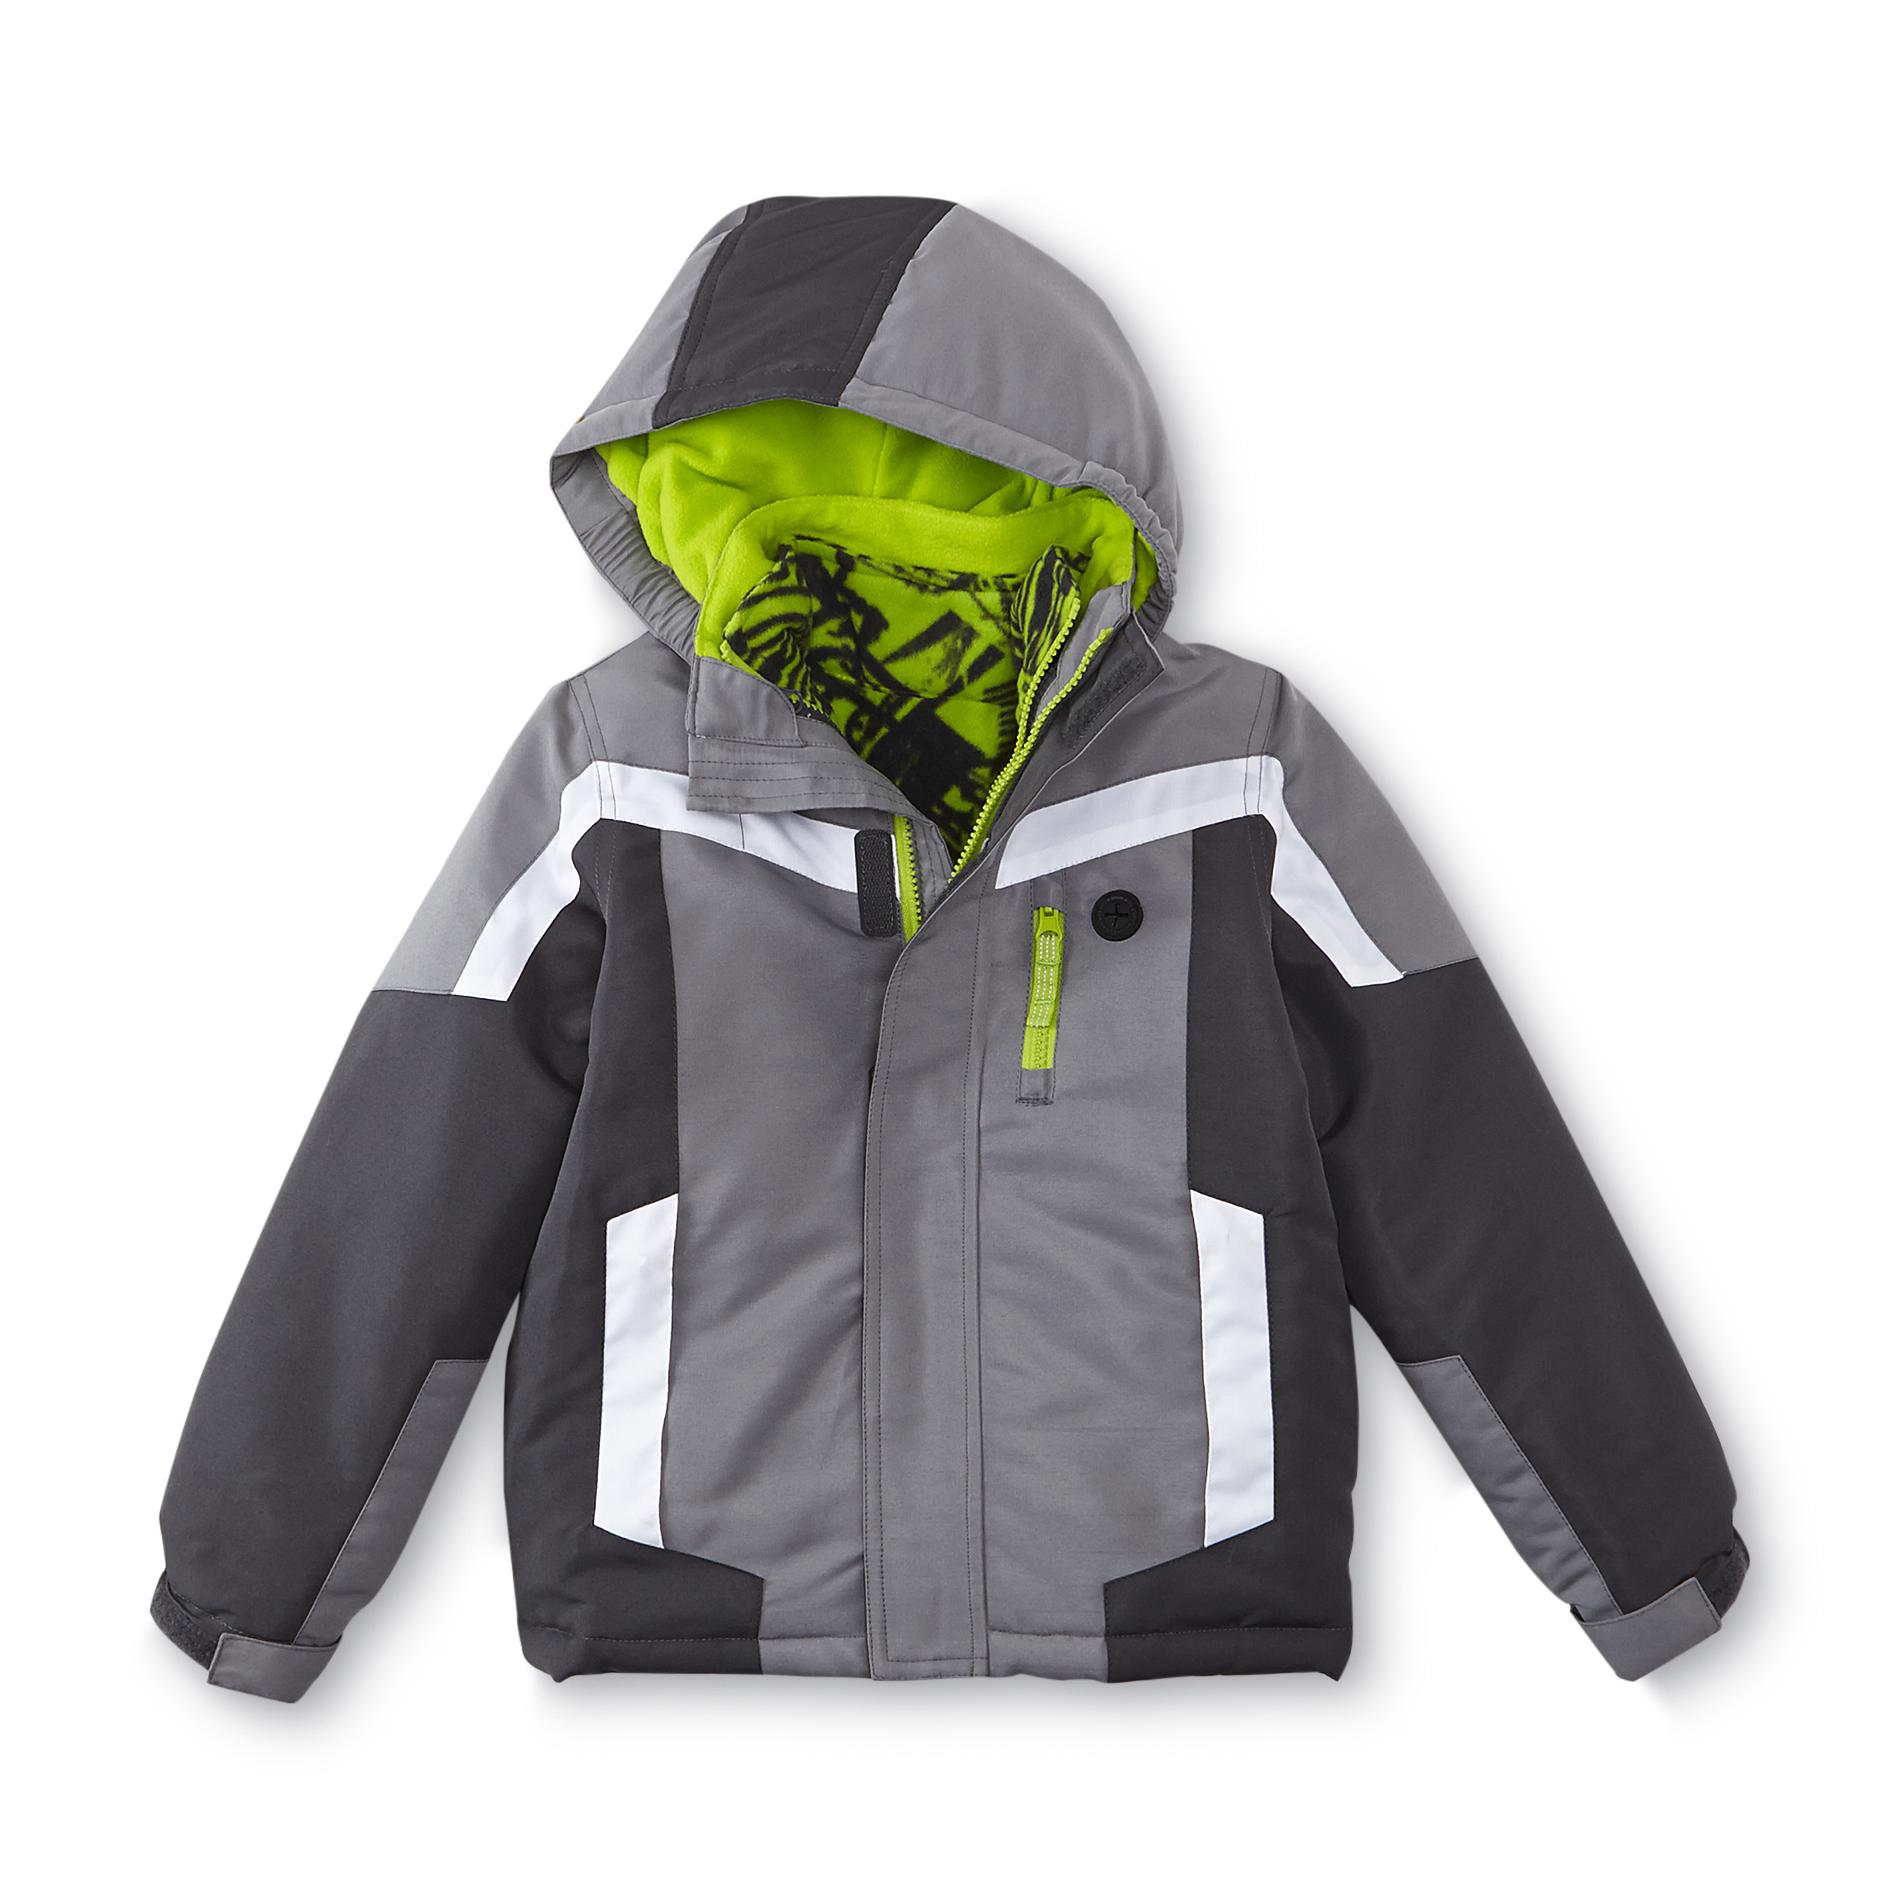 Canyon River Blues Boy's 3-In-1 Winter Jacket - Colorblock